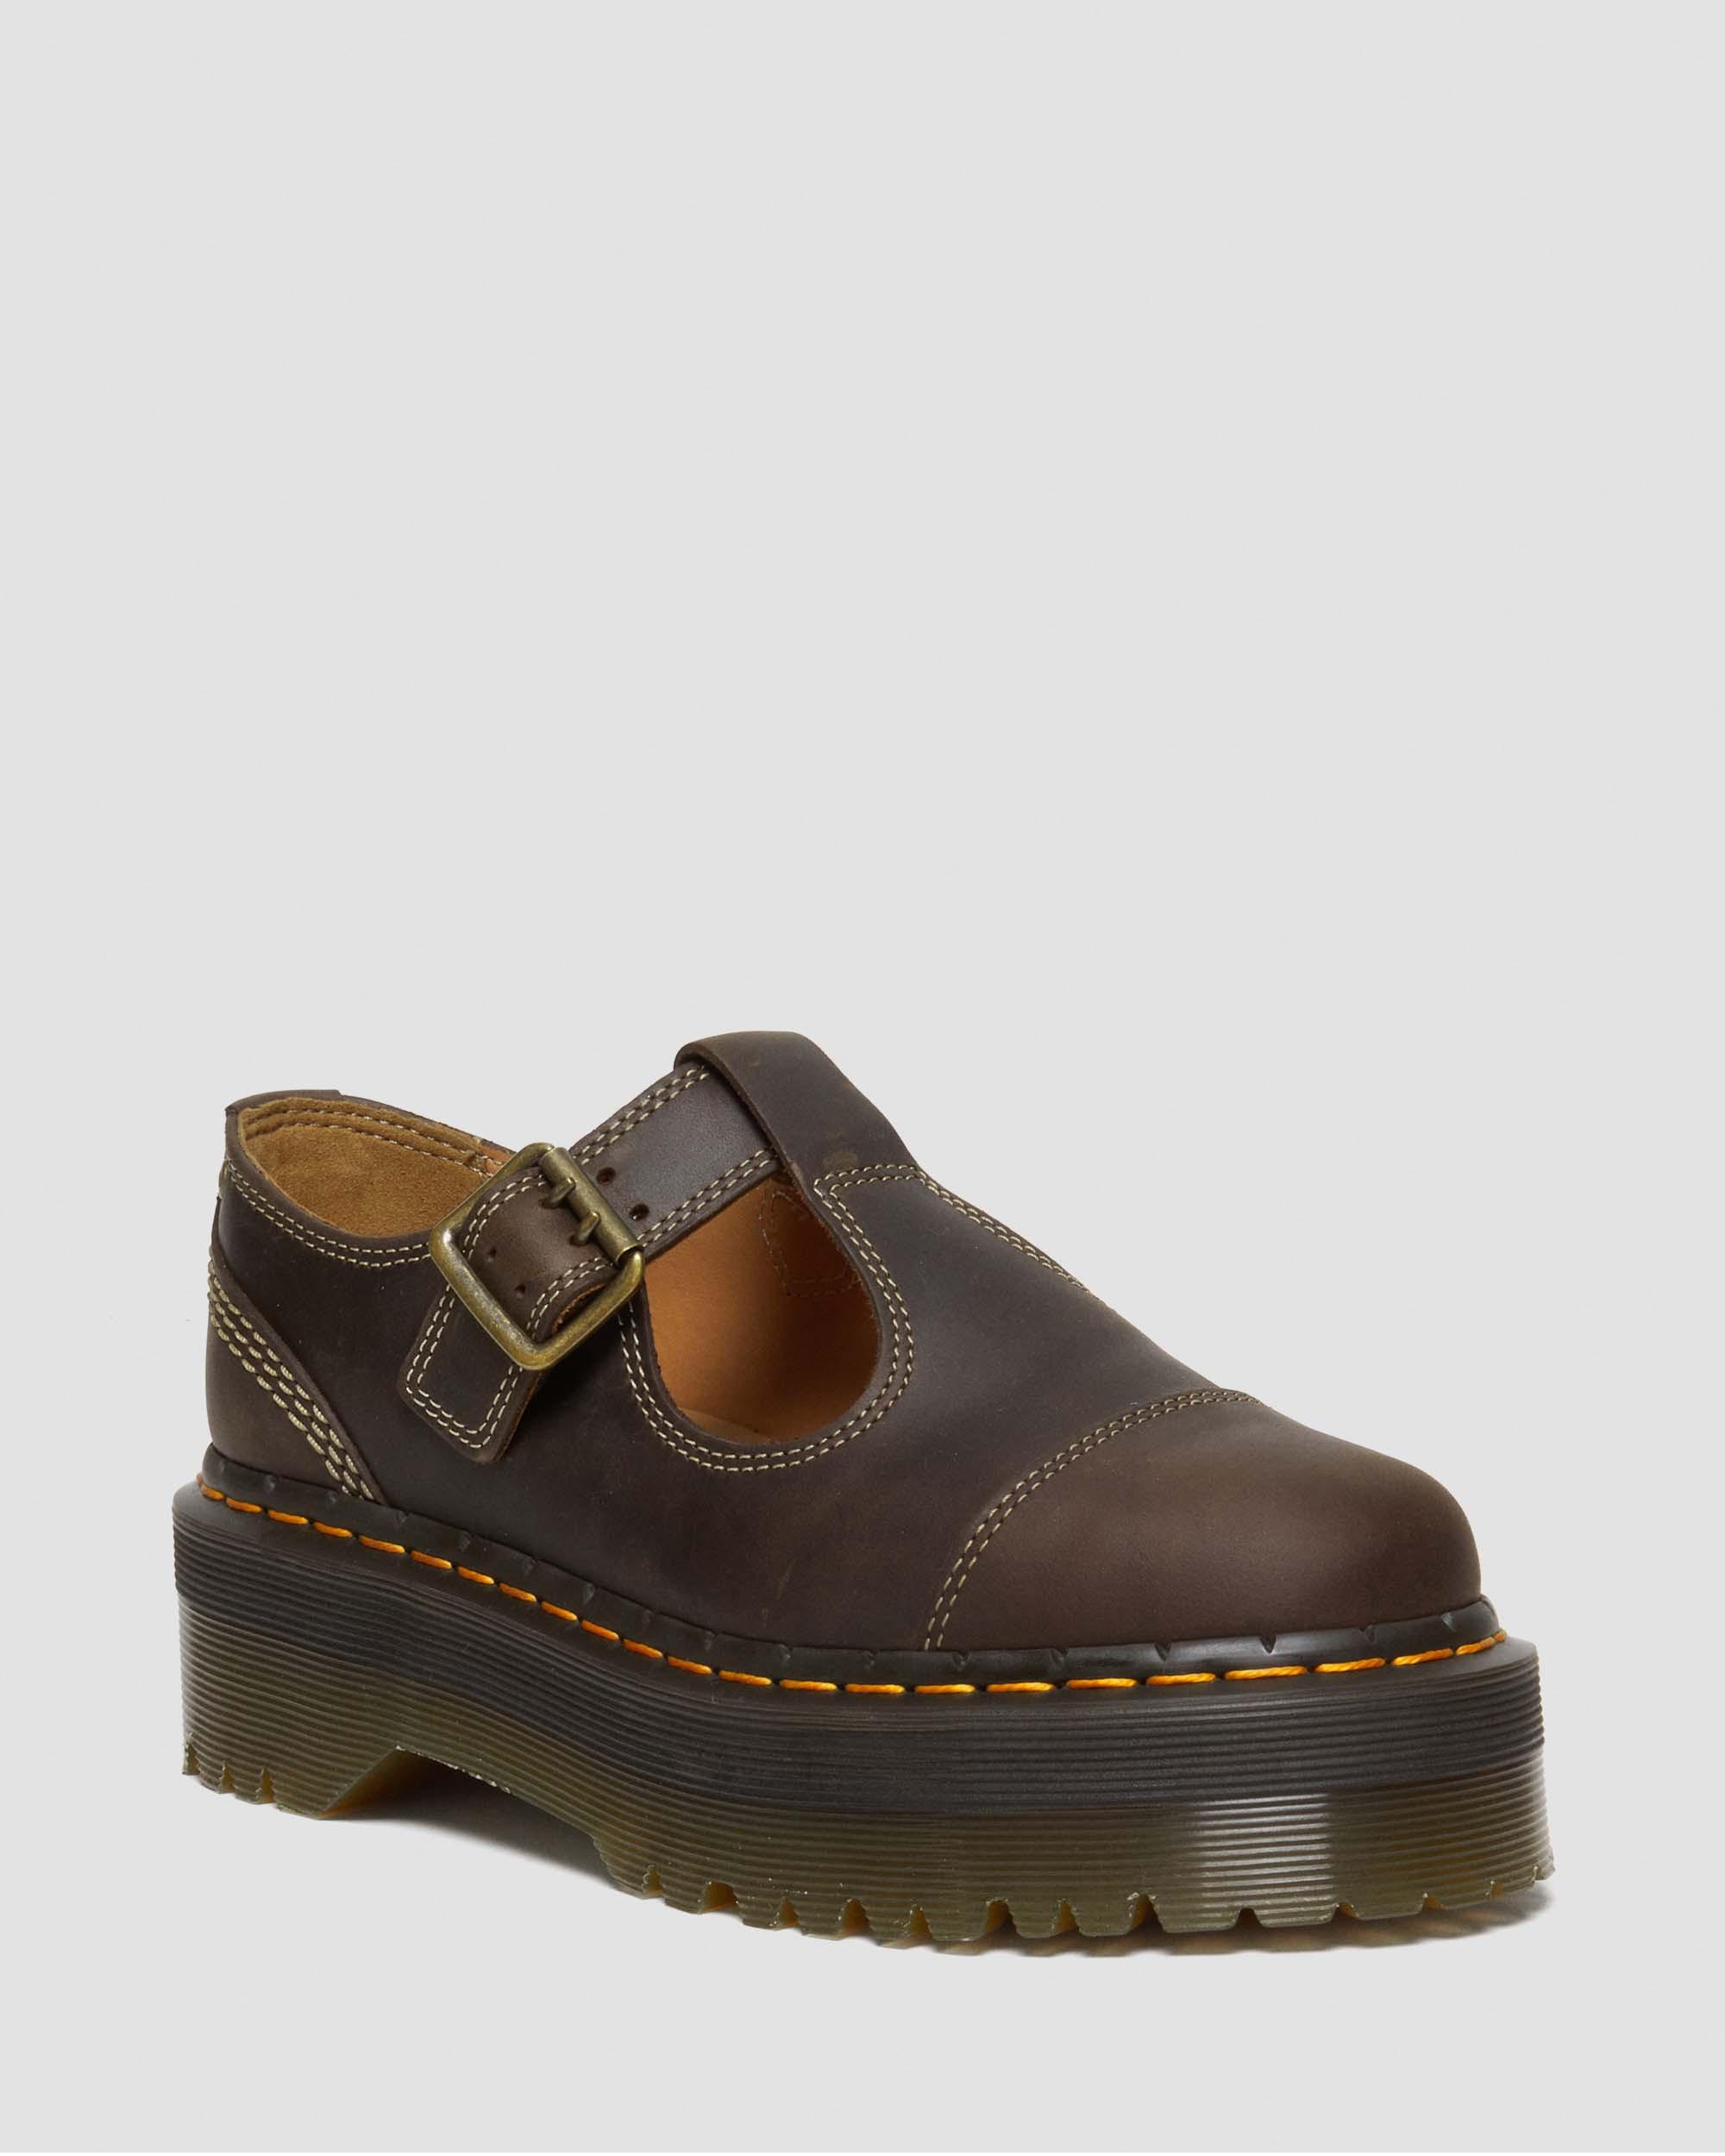 8065 Crazy Horse Leather Mary Jane Shoes in Dark Brown | Dr. Martens